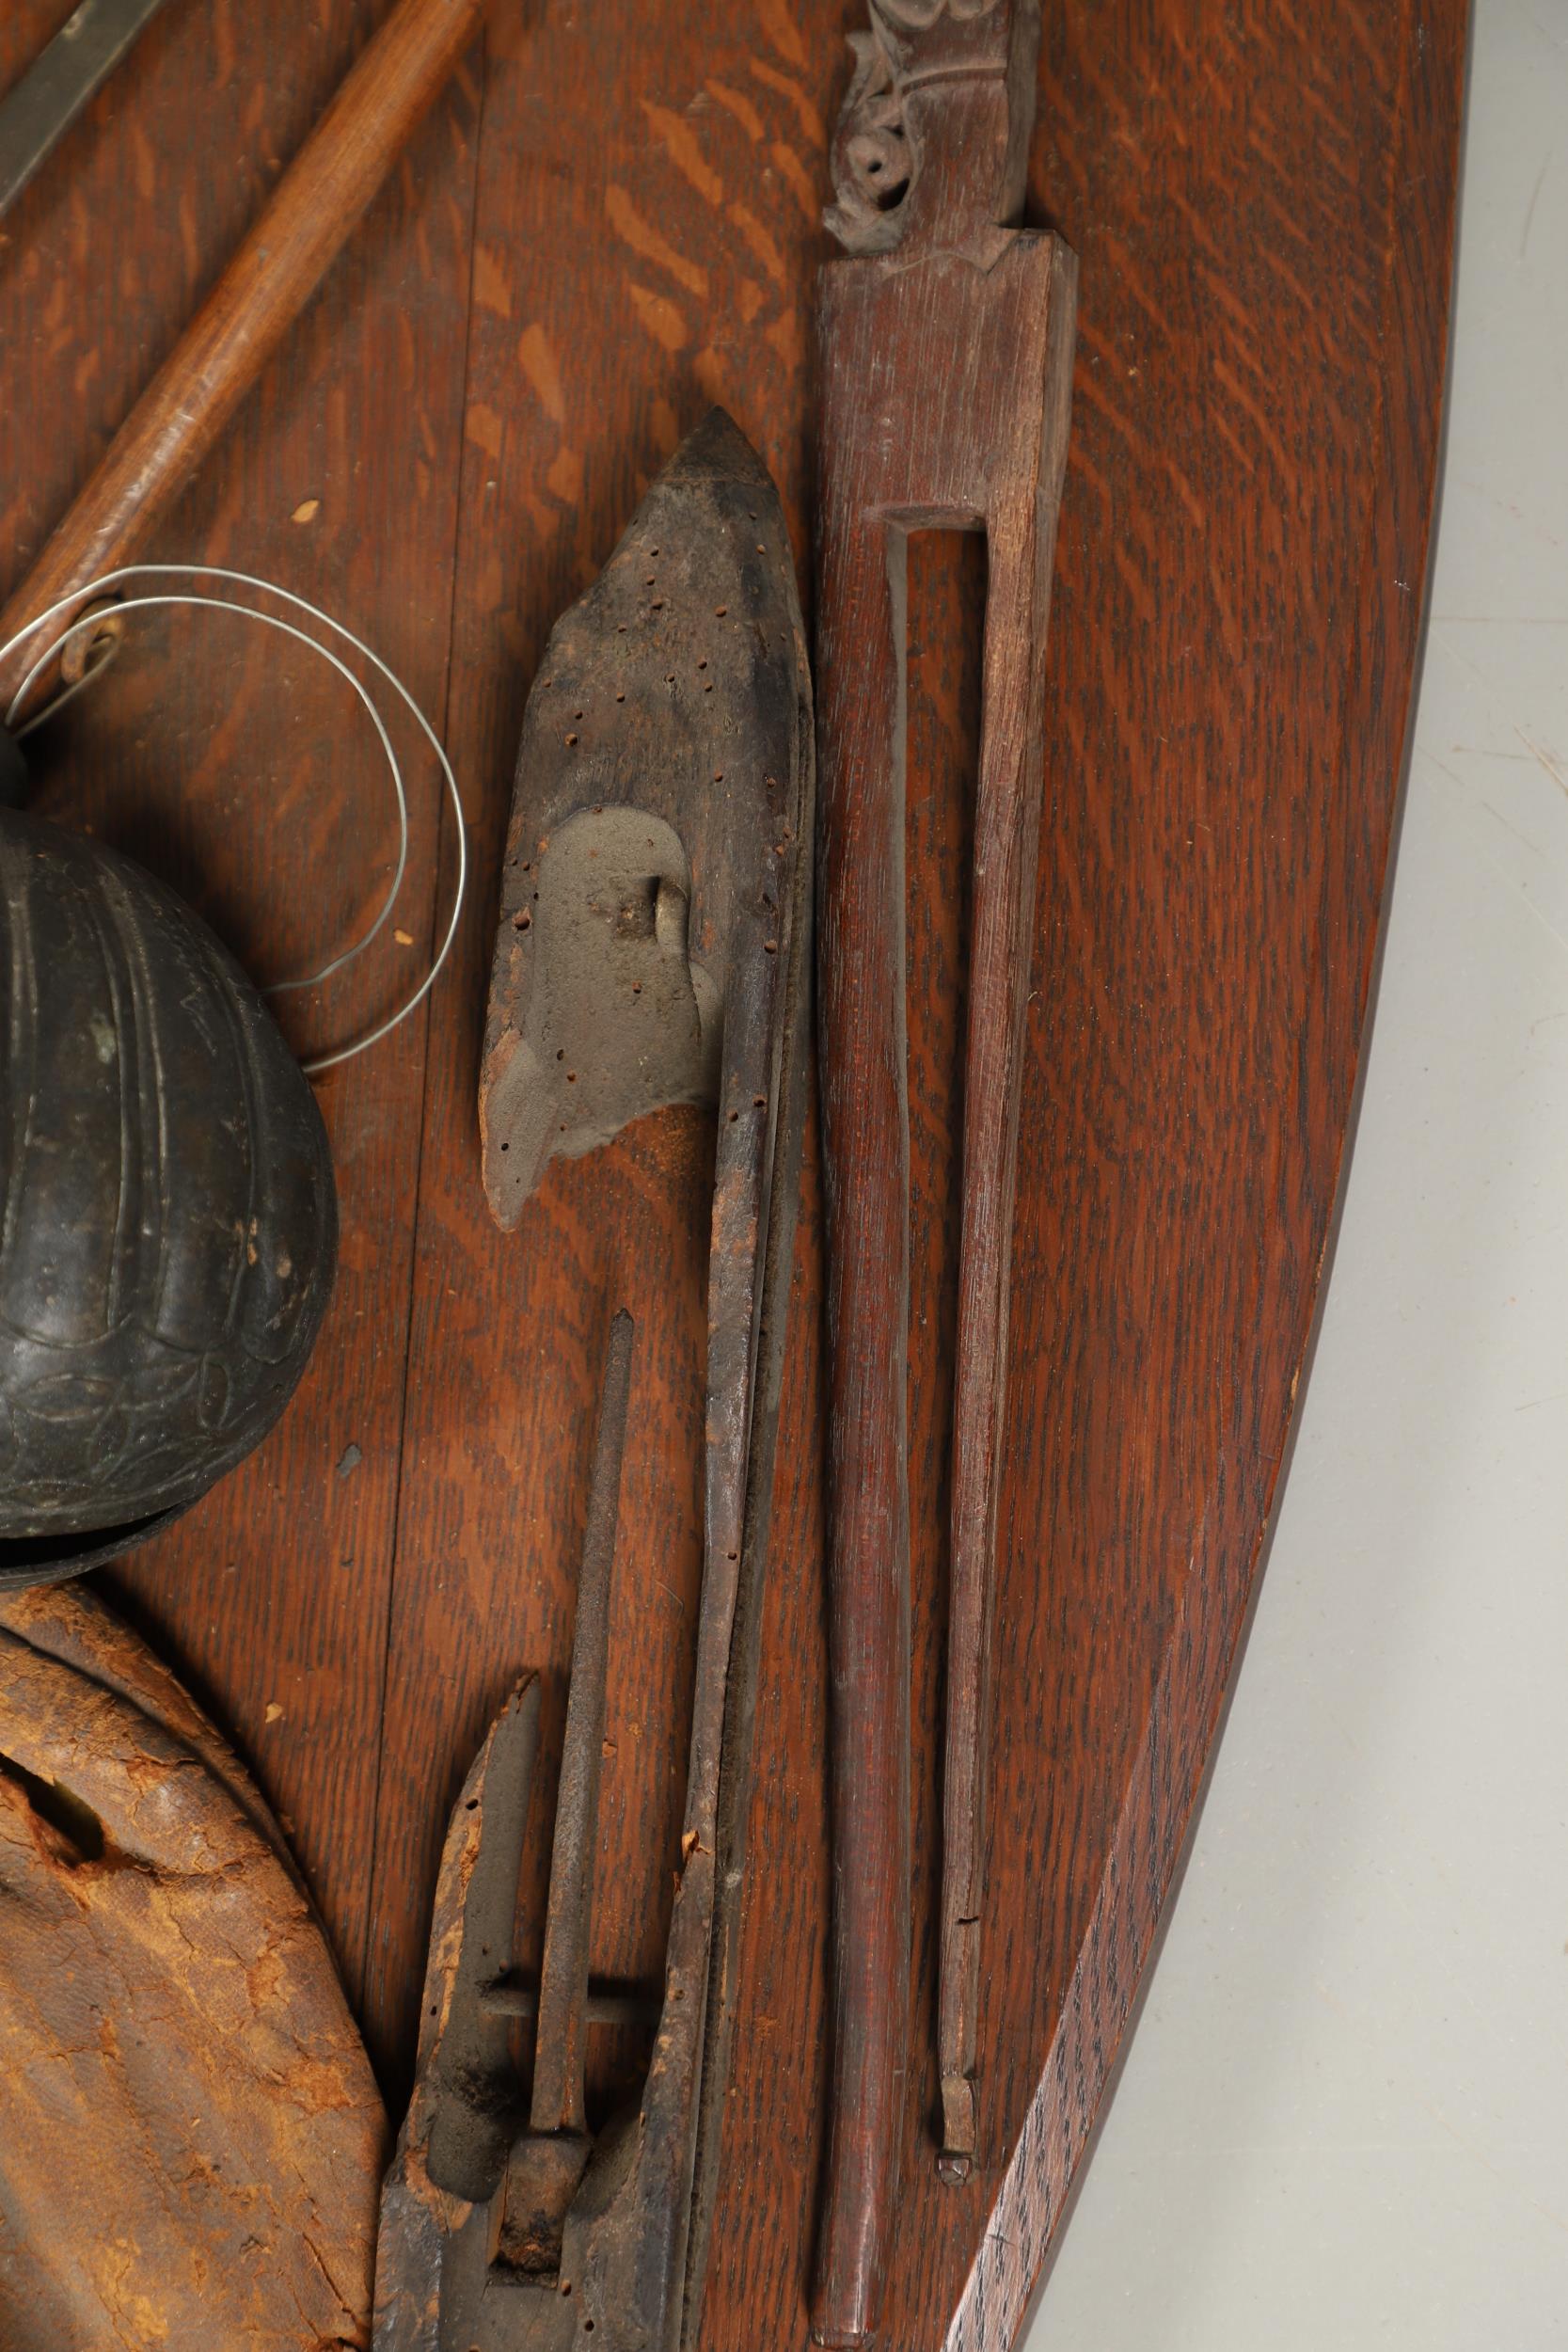 AN UNUSUAL OAK SHIELD MOUNTED WITH MILITARY TROPHIES, CURIOSITIES AND OTHER ITEMS. - Image 13 of 15